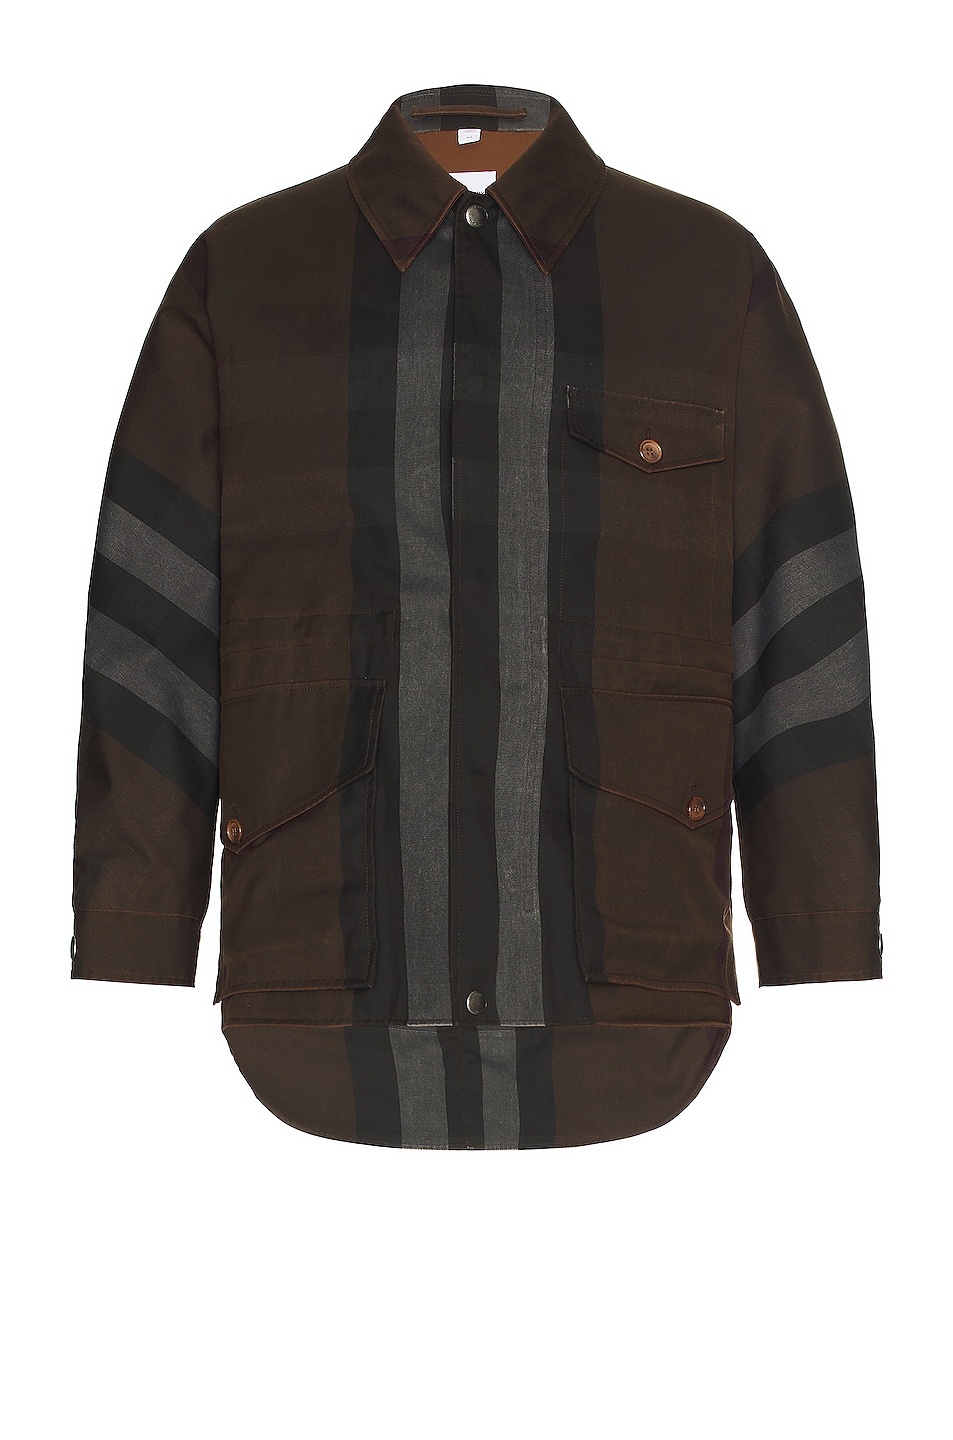 Image 1 of Burberry Washed Check Workwear Jacket in Dark Birch Brown Check